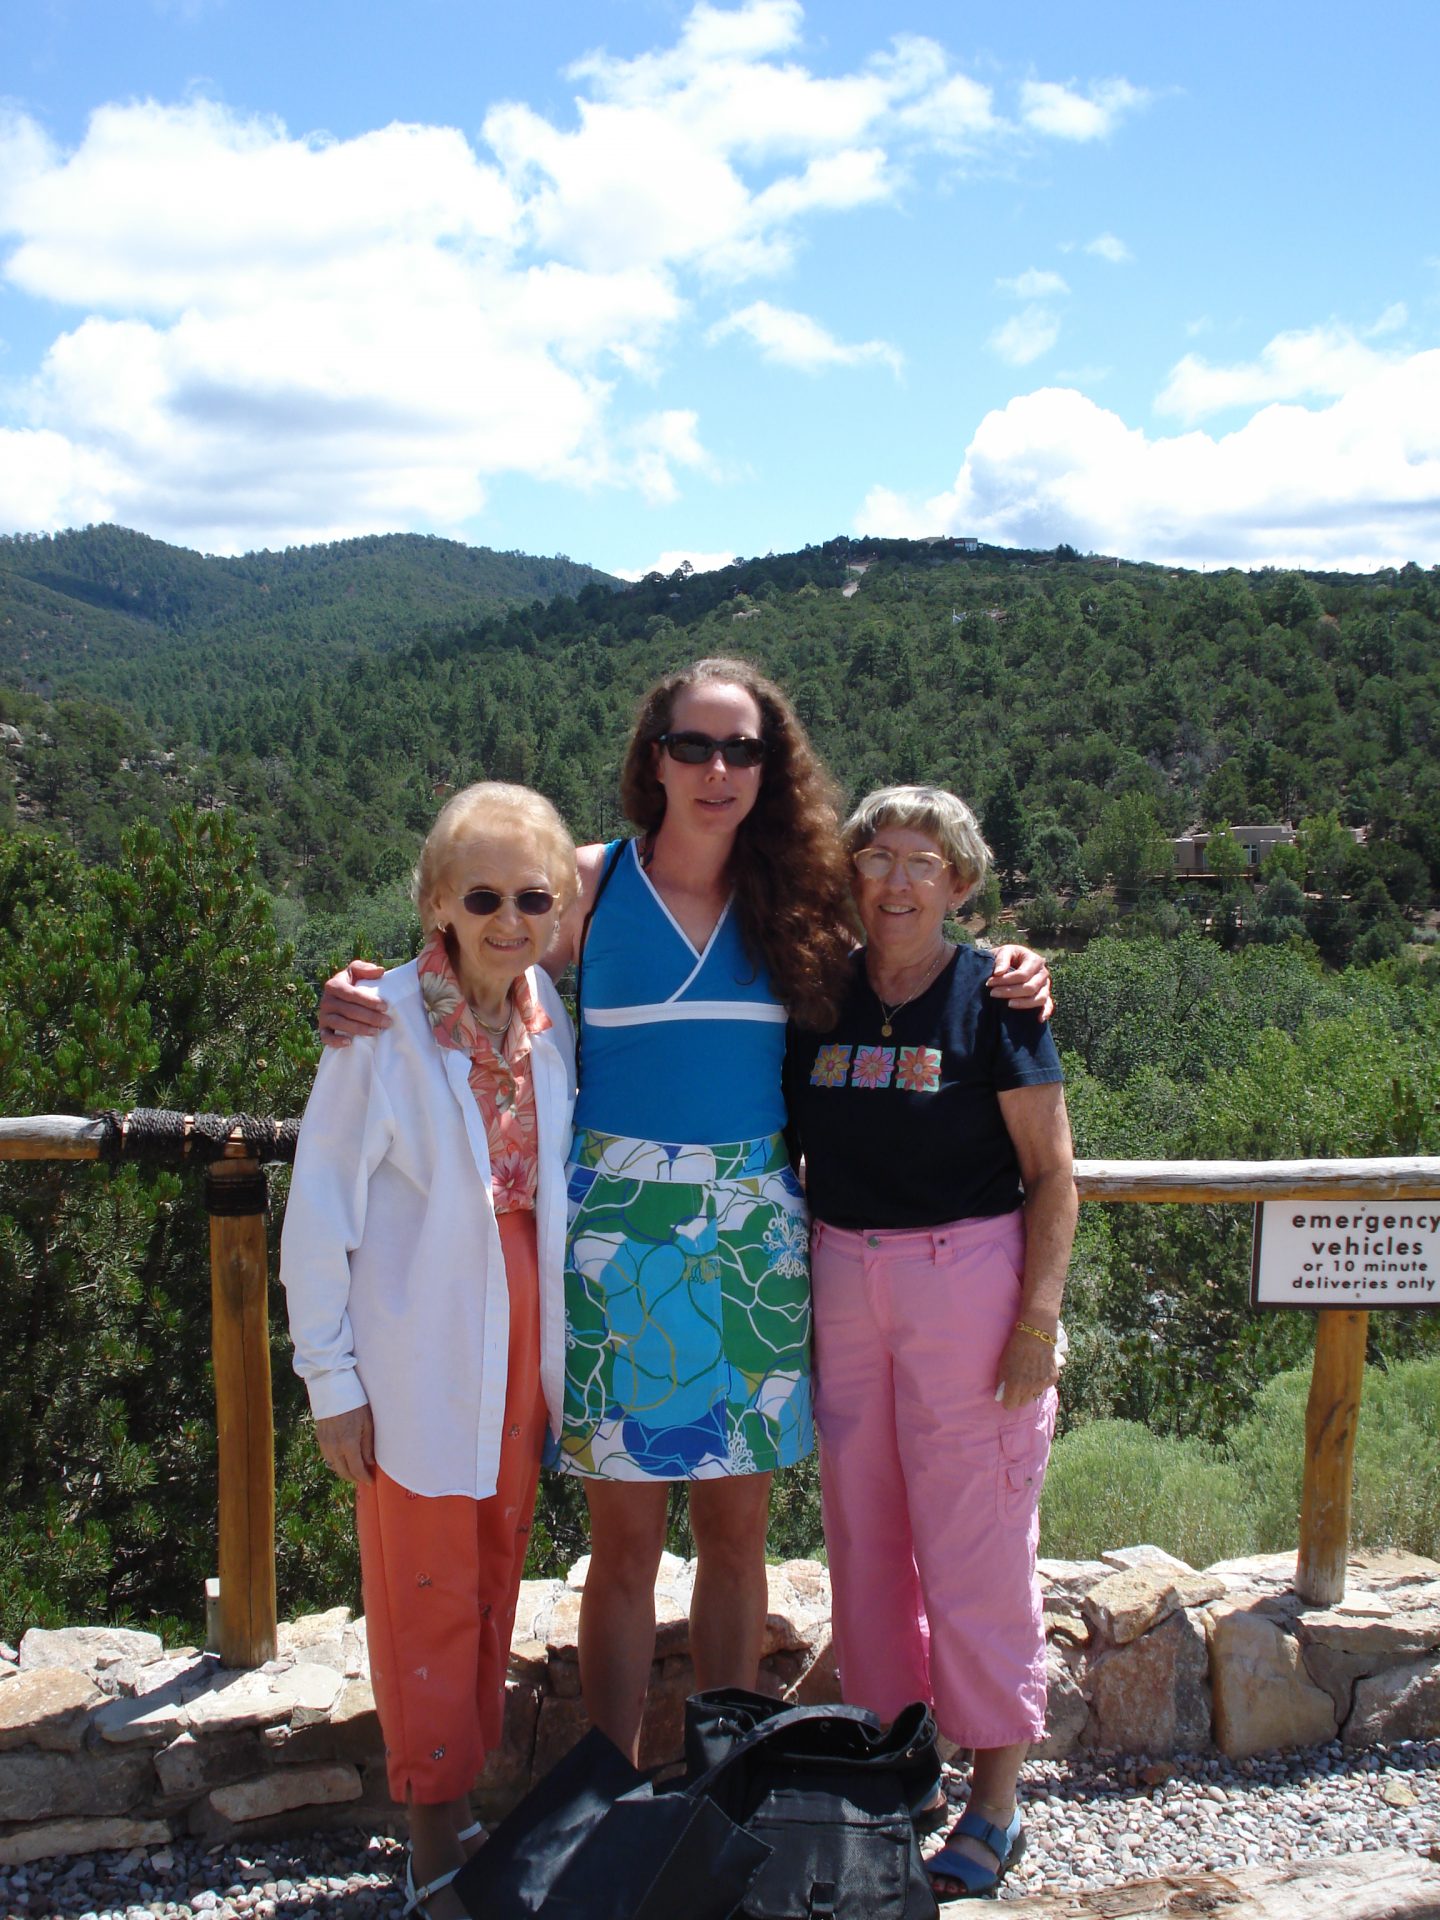 I have wonderful memories of Muriel when she and Dot came to visit me in New Mexico.  I really miss her.